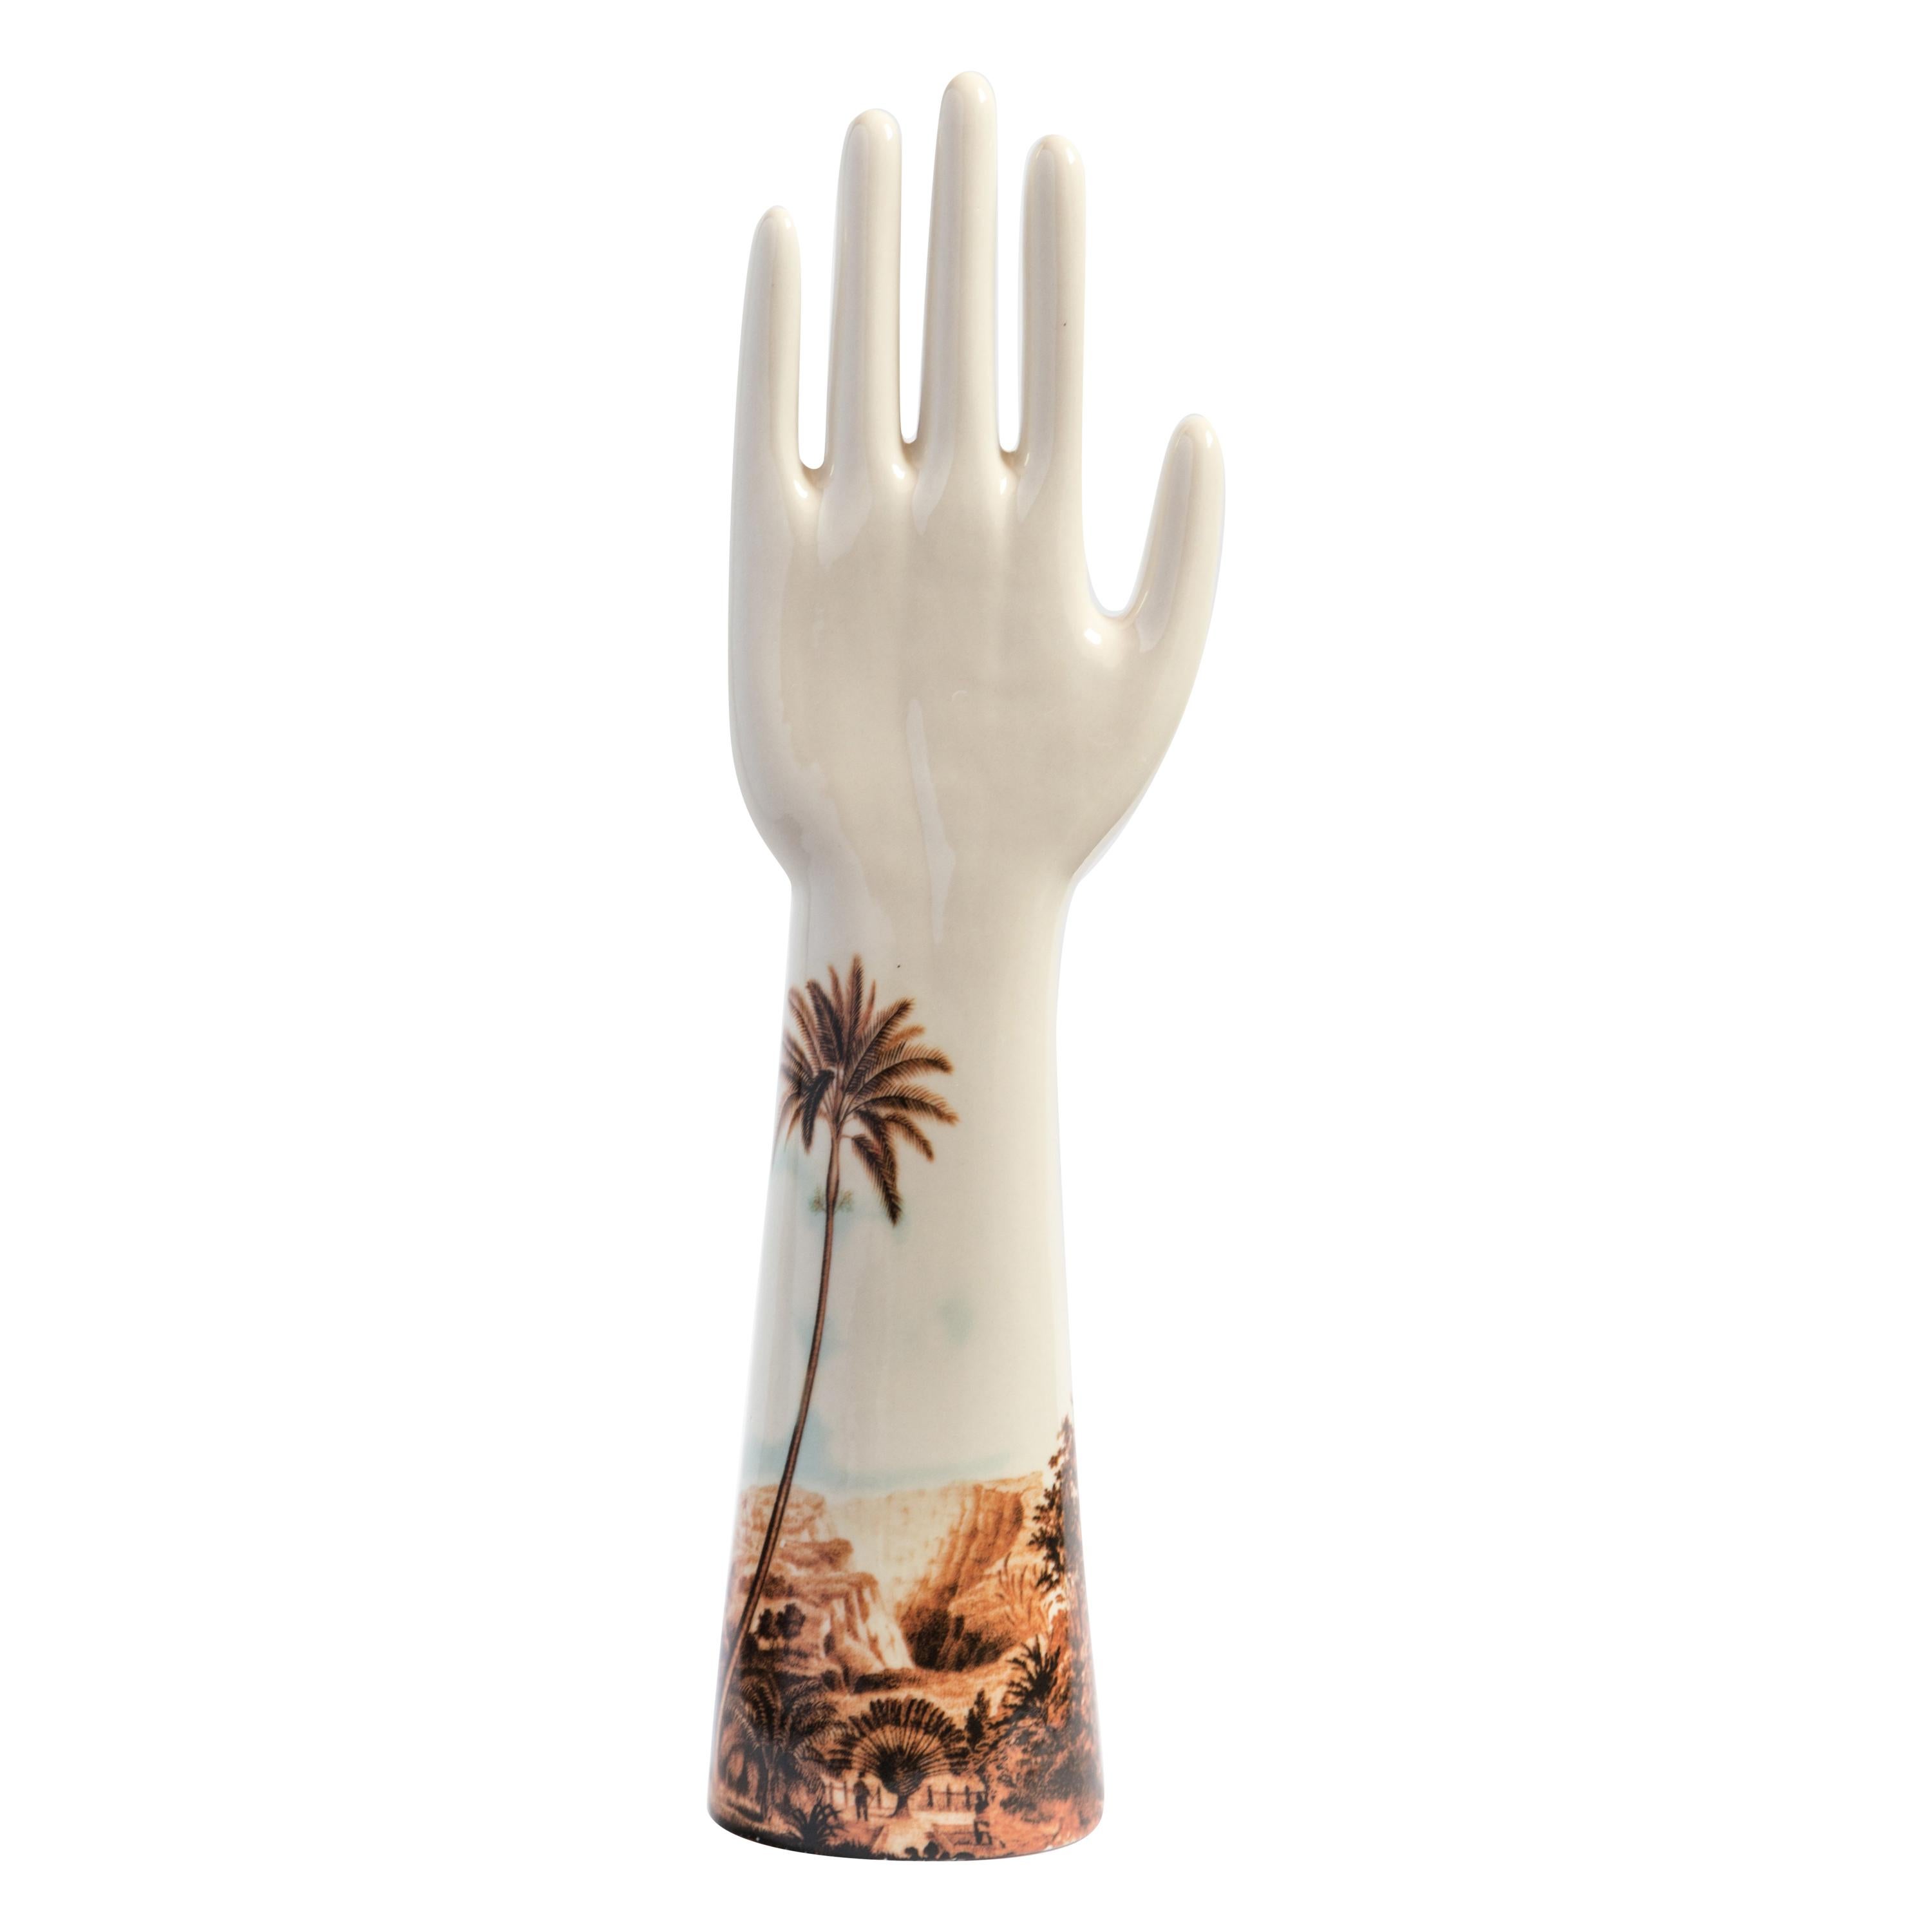 Anatomica, Porcelain Hand with Las Palmas Decoration by Vito Nesta For Sale